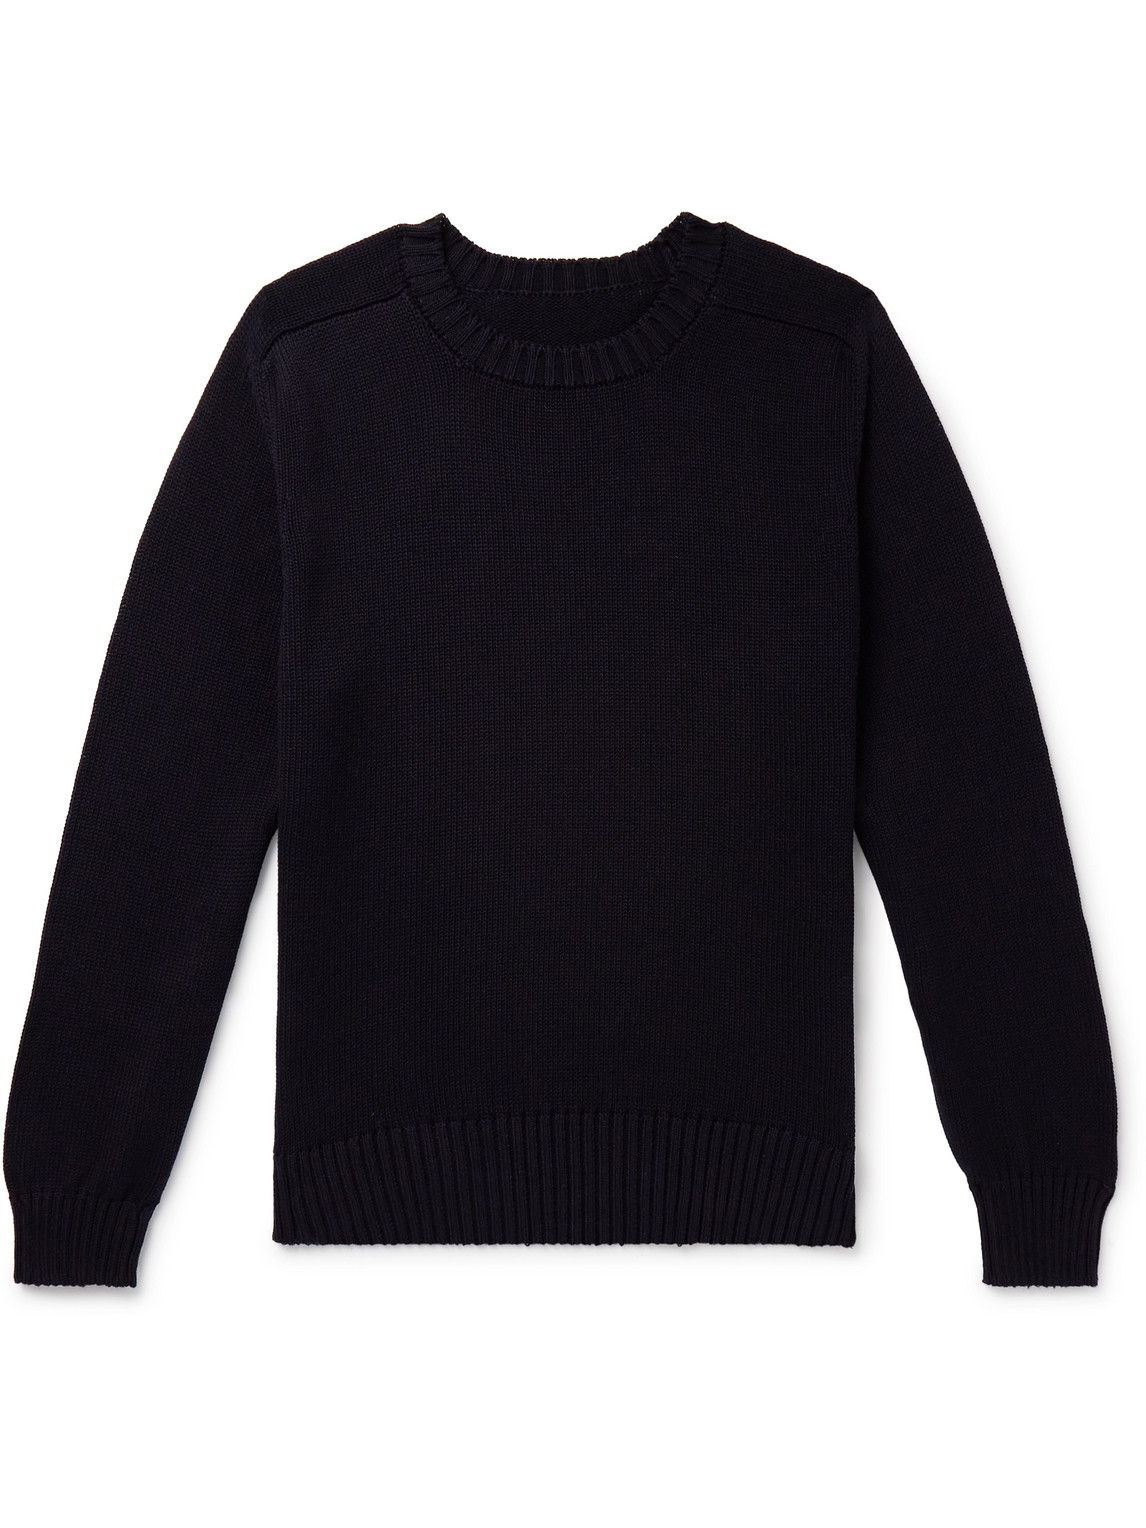 Anderson & Sheppard Cotton Sweater In Black